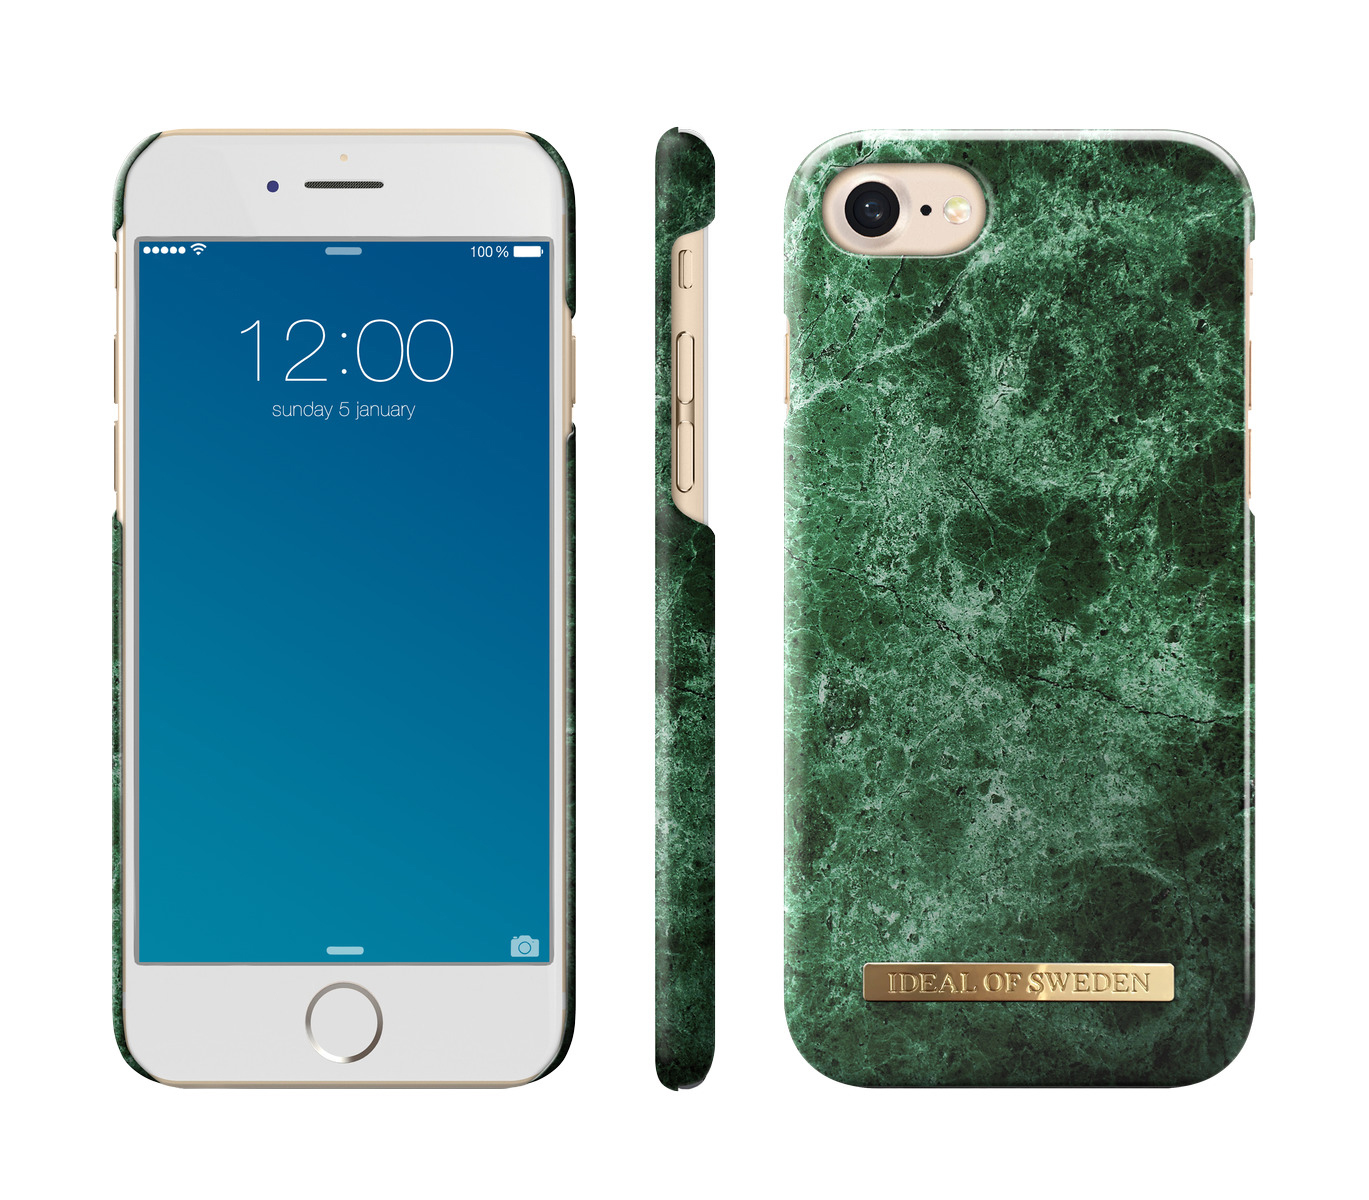 iPhone 6, 7, Fashion, Apple, 8, IDEAL Marble OF Backcover, iPhone iPhone Green SWEDEN